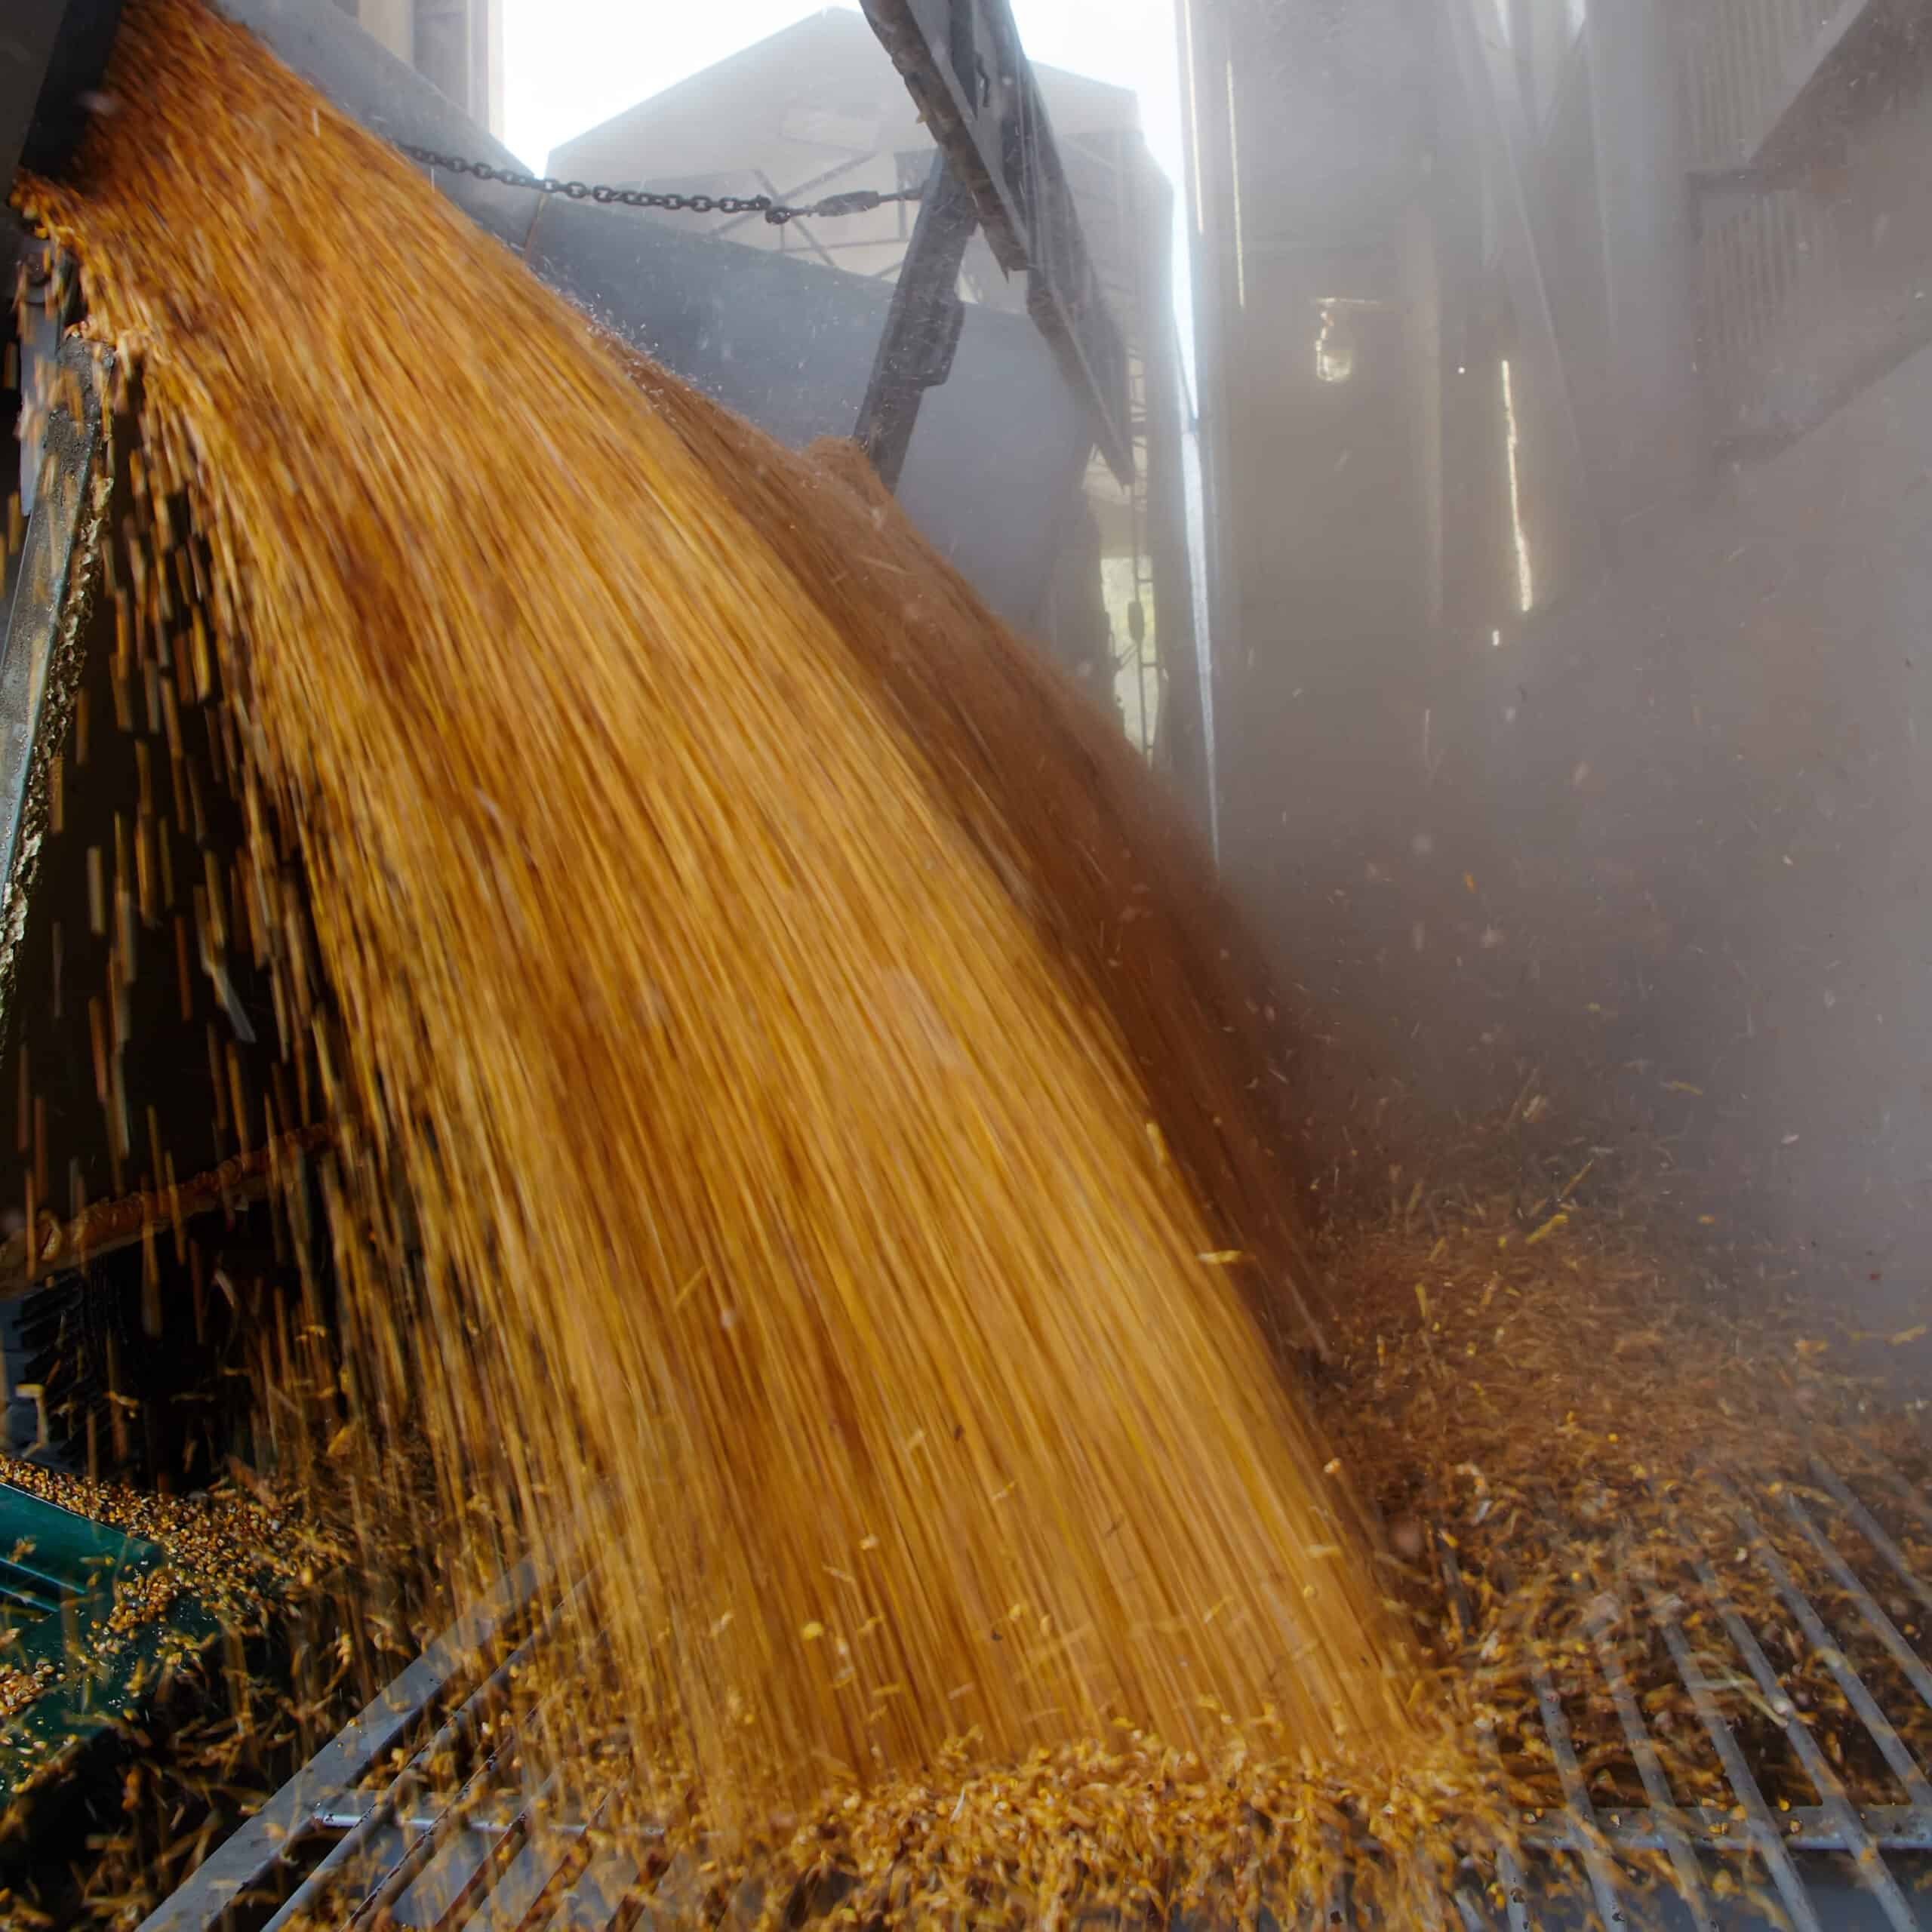 Dust billows where kernels of wheat cascade from a hopper into a meatal grate where ANACONDA SEALTITE® Anti-Static conduit might be installed to protect electrical wiring from exposure.